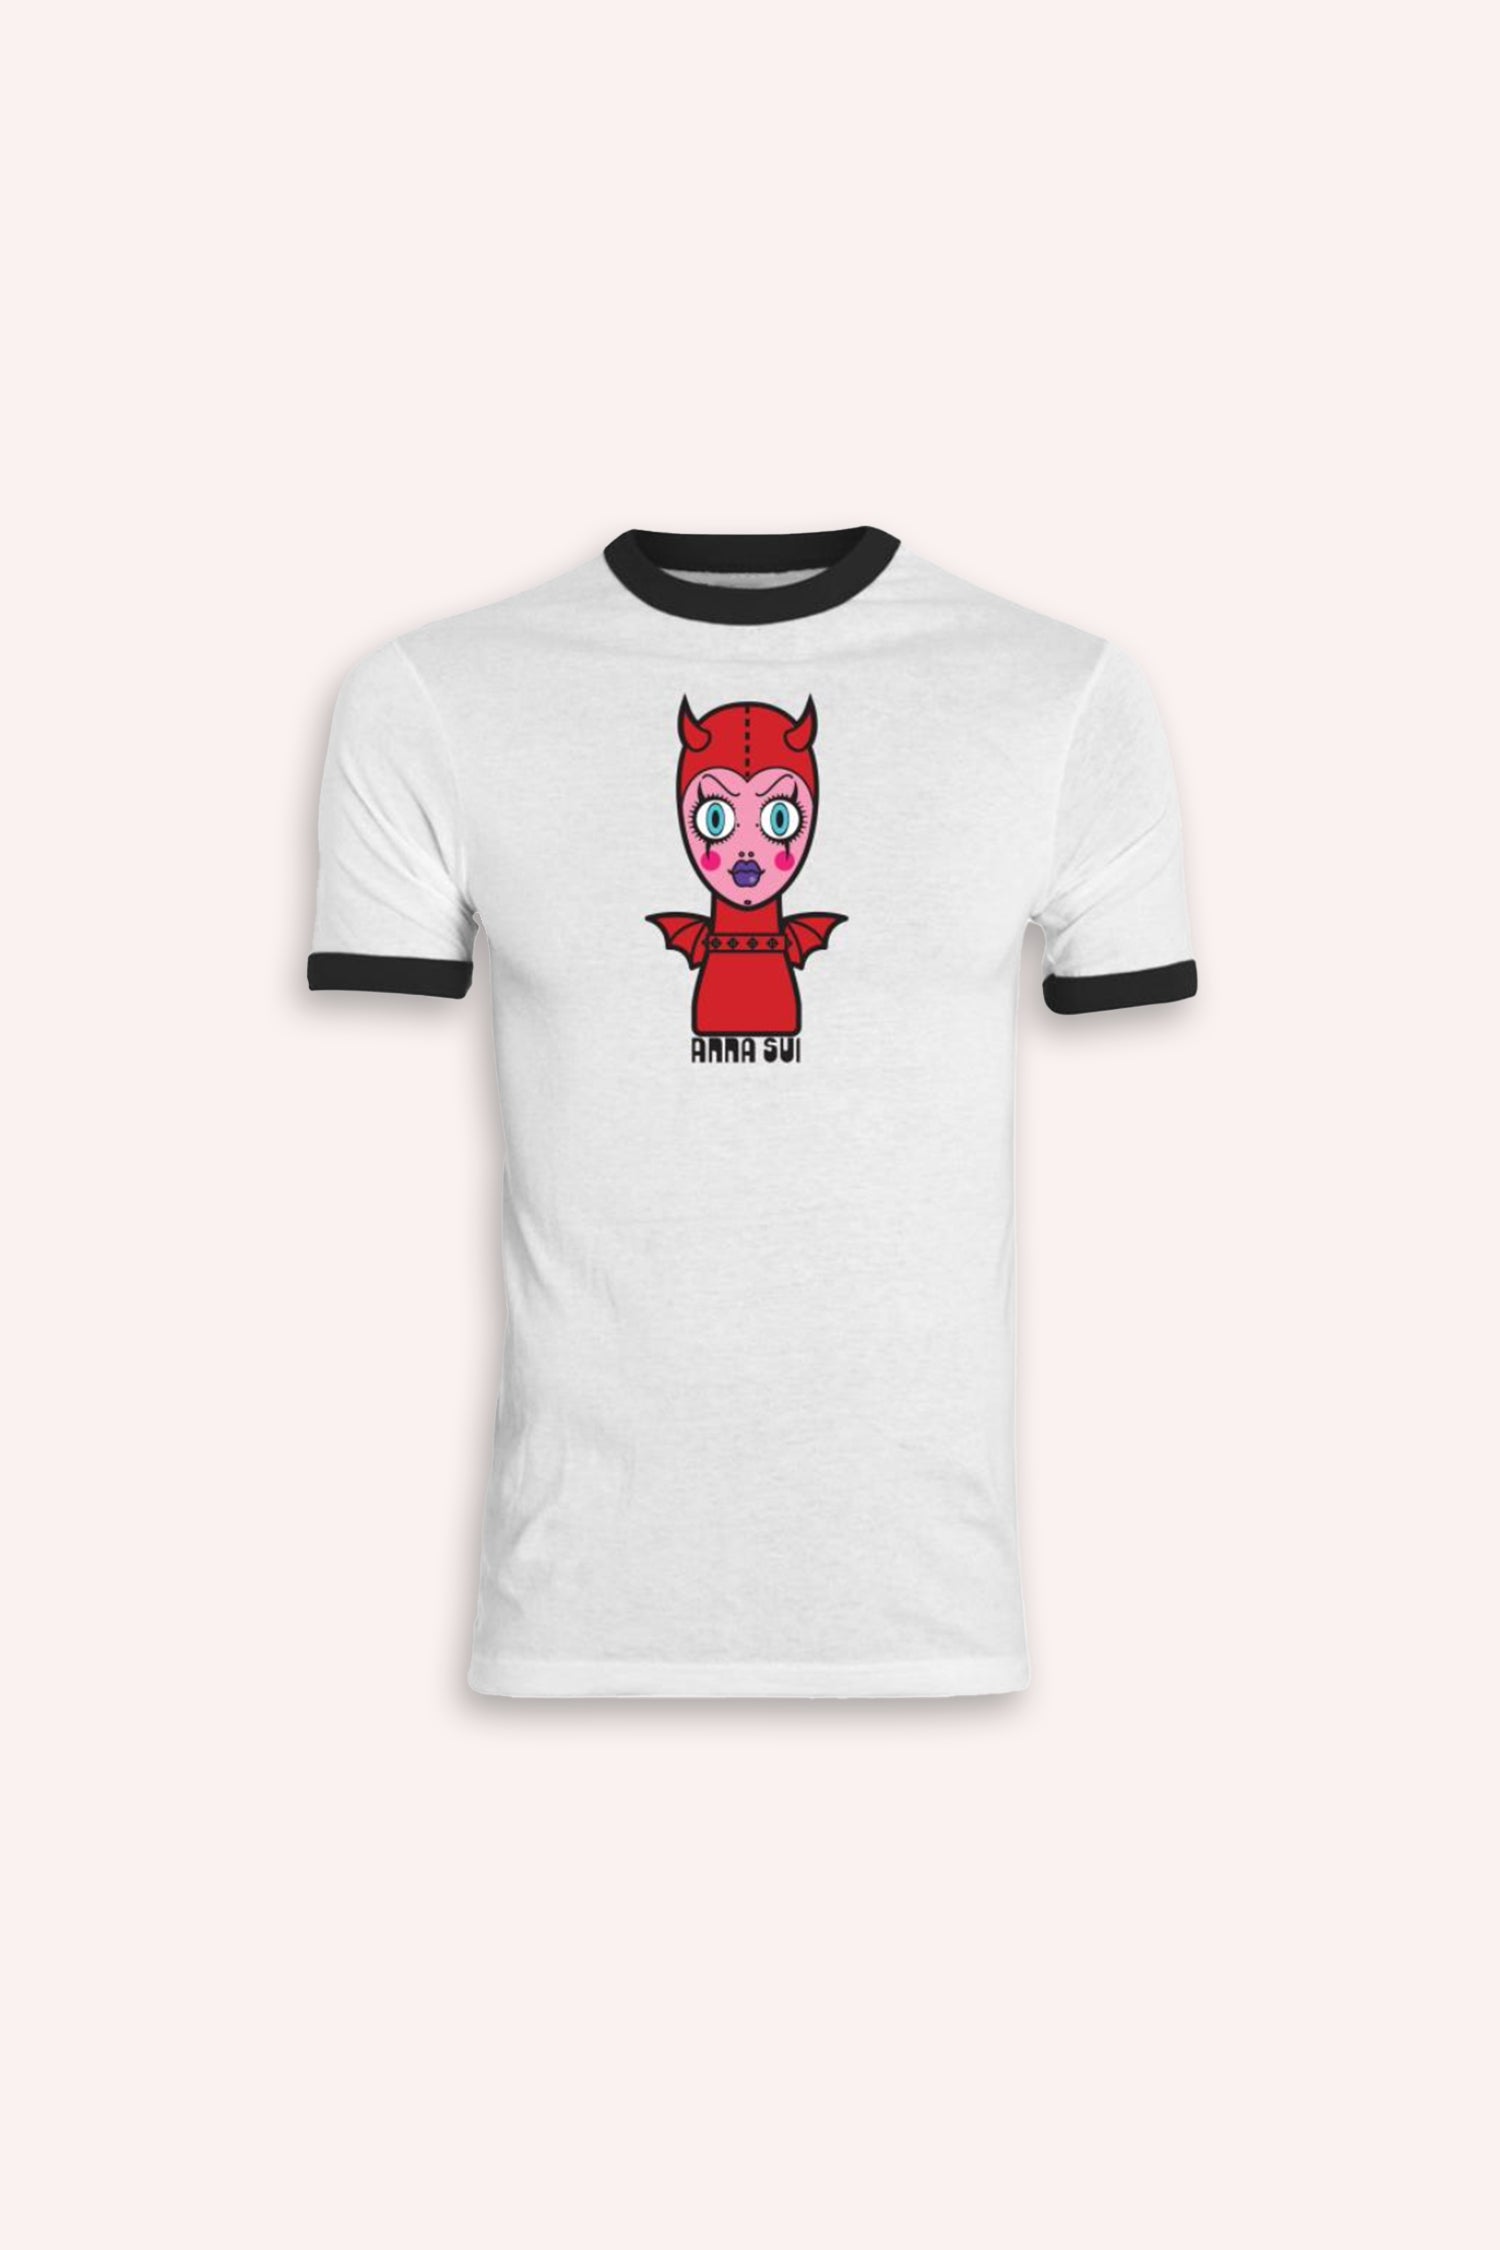 White tee with black edges at collar and arm, print in front representing a red and pink doll with devil looki